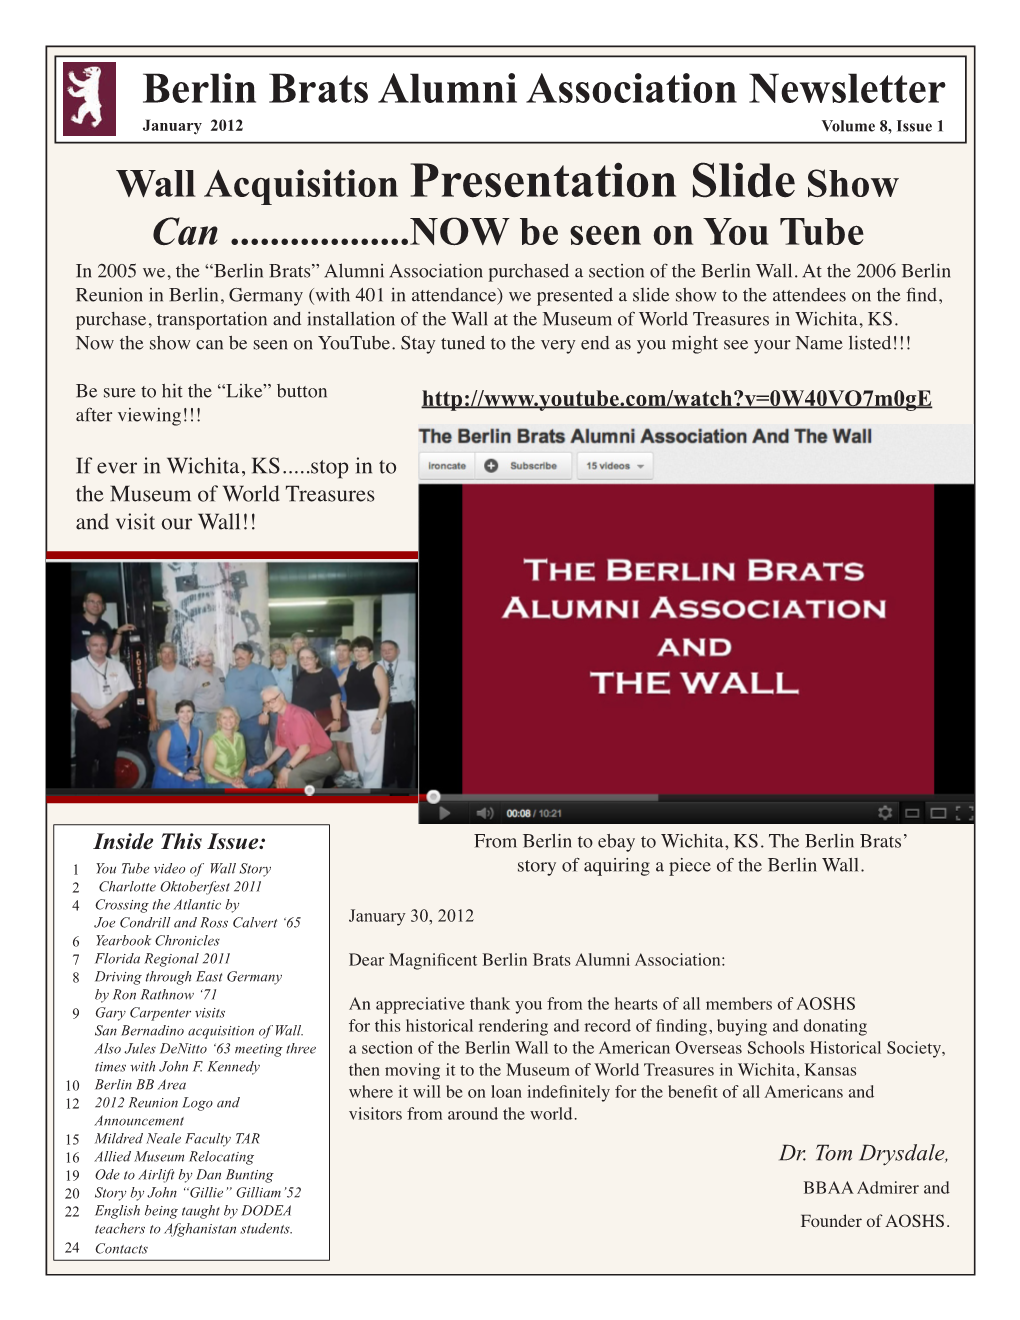 Wall Acquisition Presentation Slide Show Can